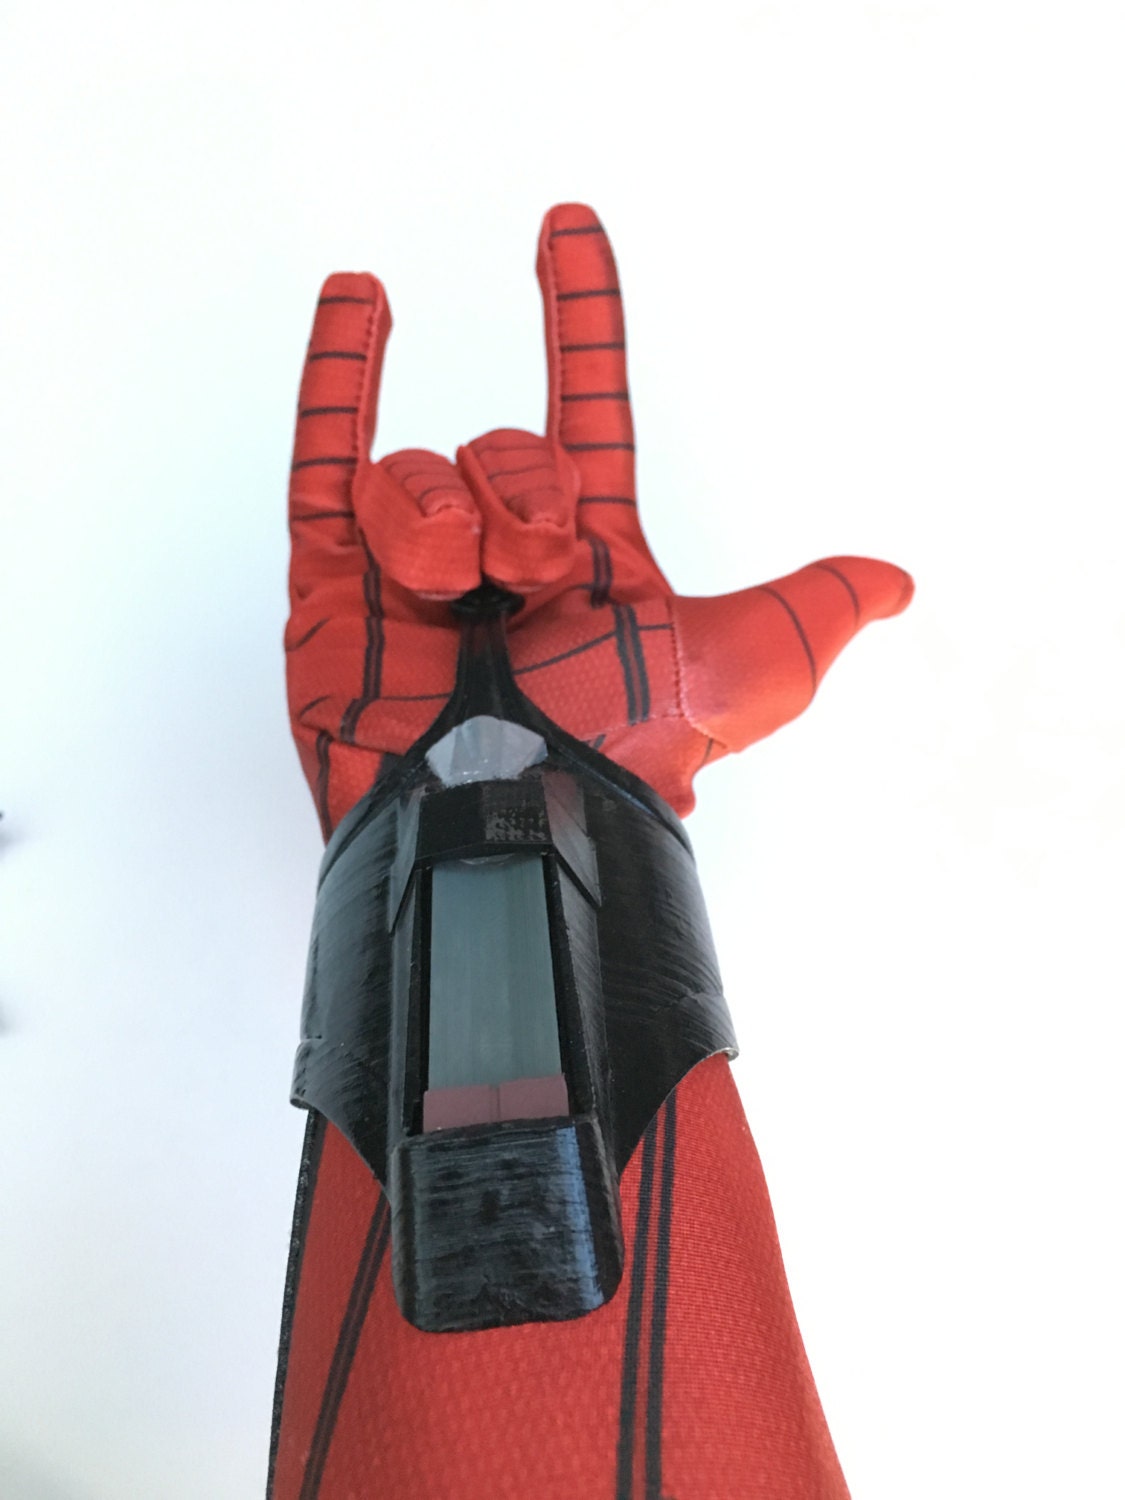 3D Printed Spider-Man Homecoming Web Shooters Pair model by